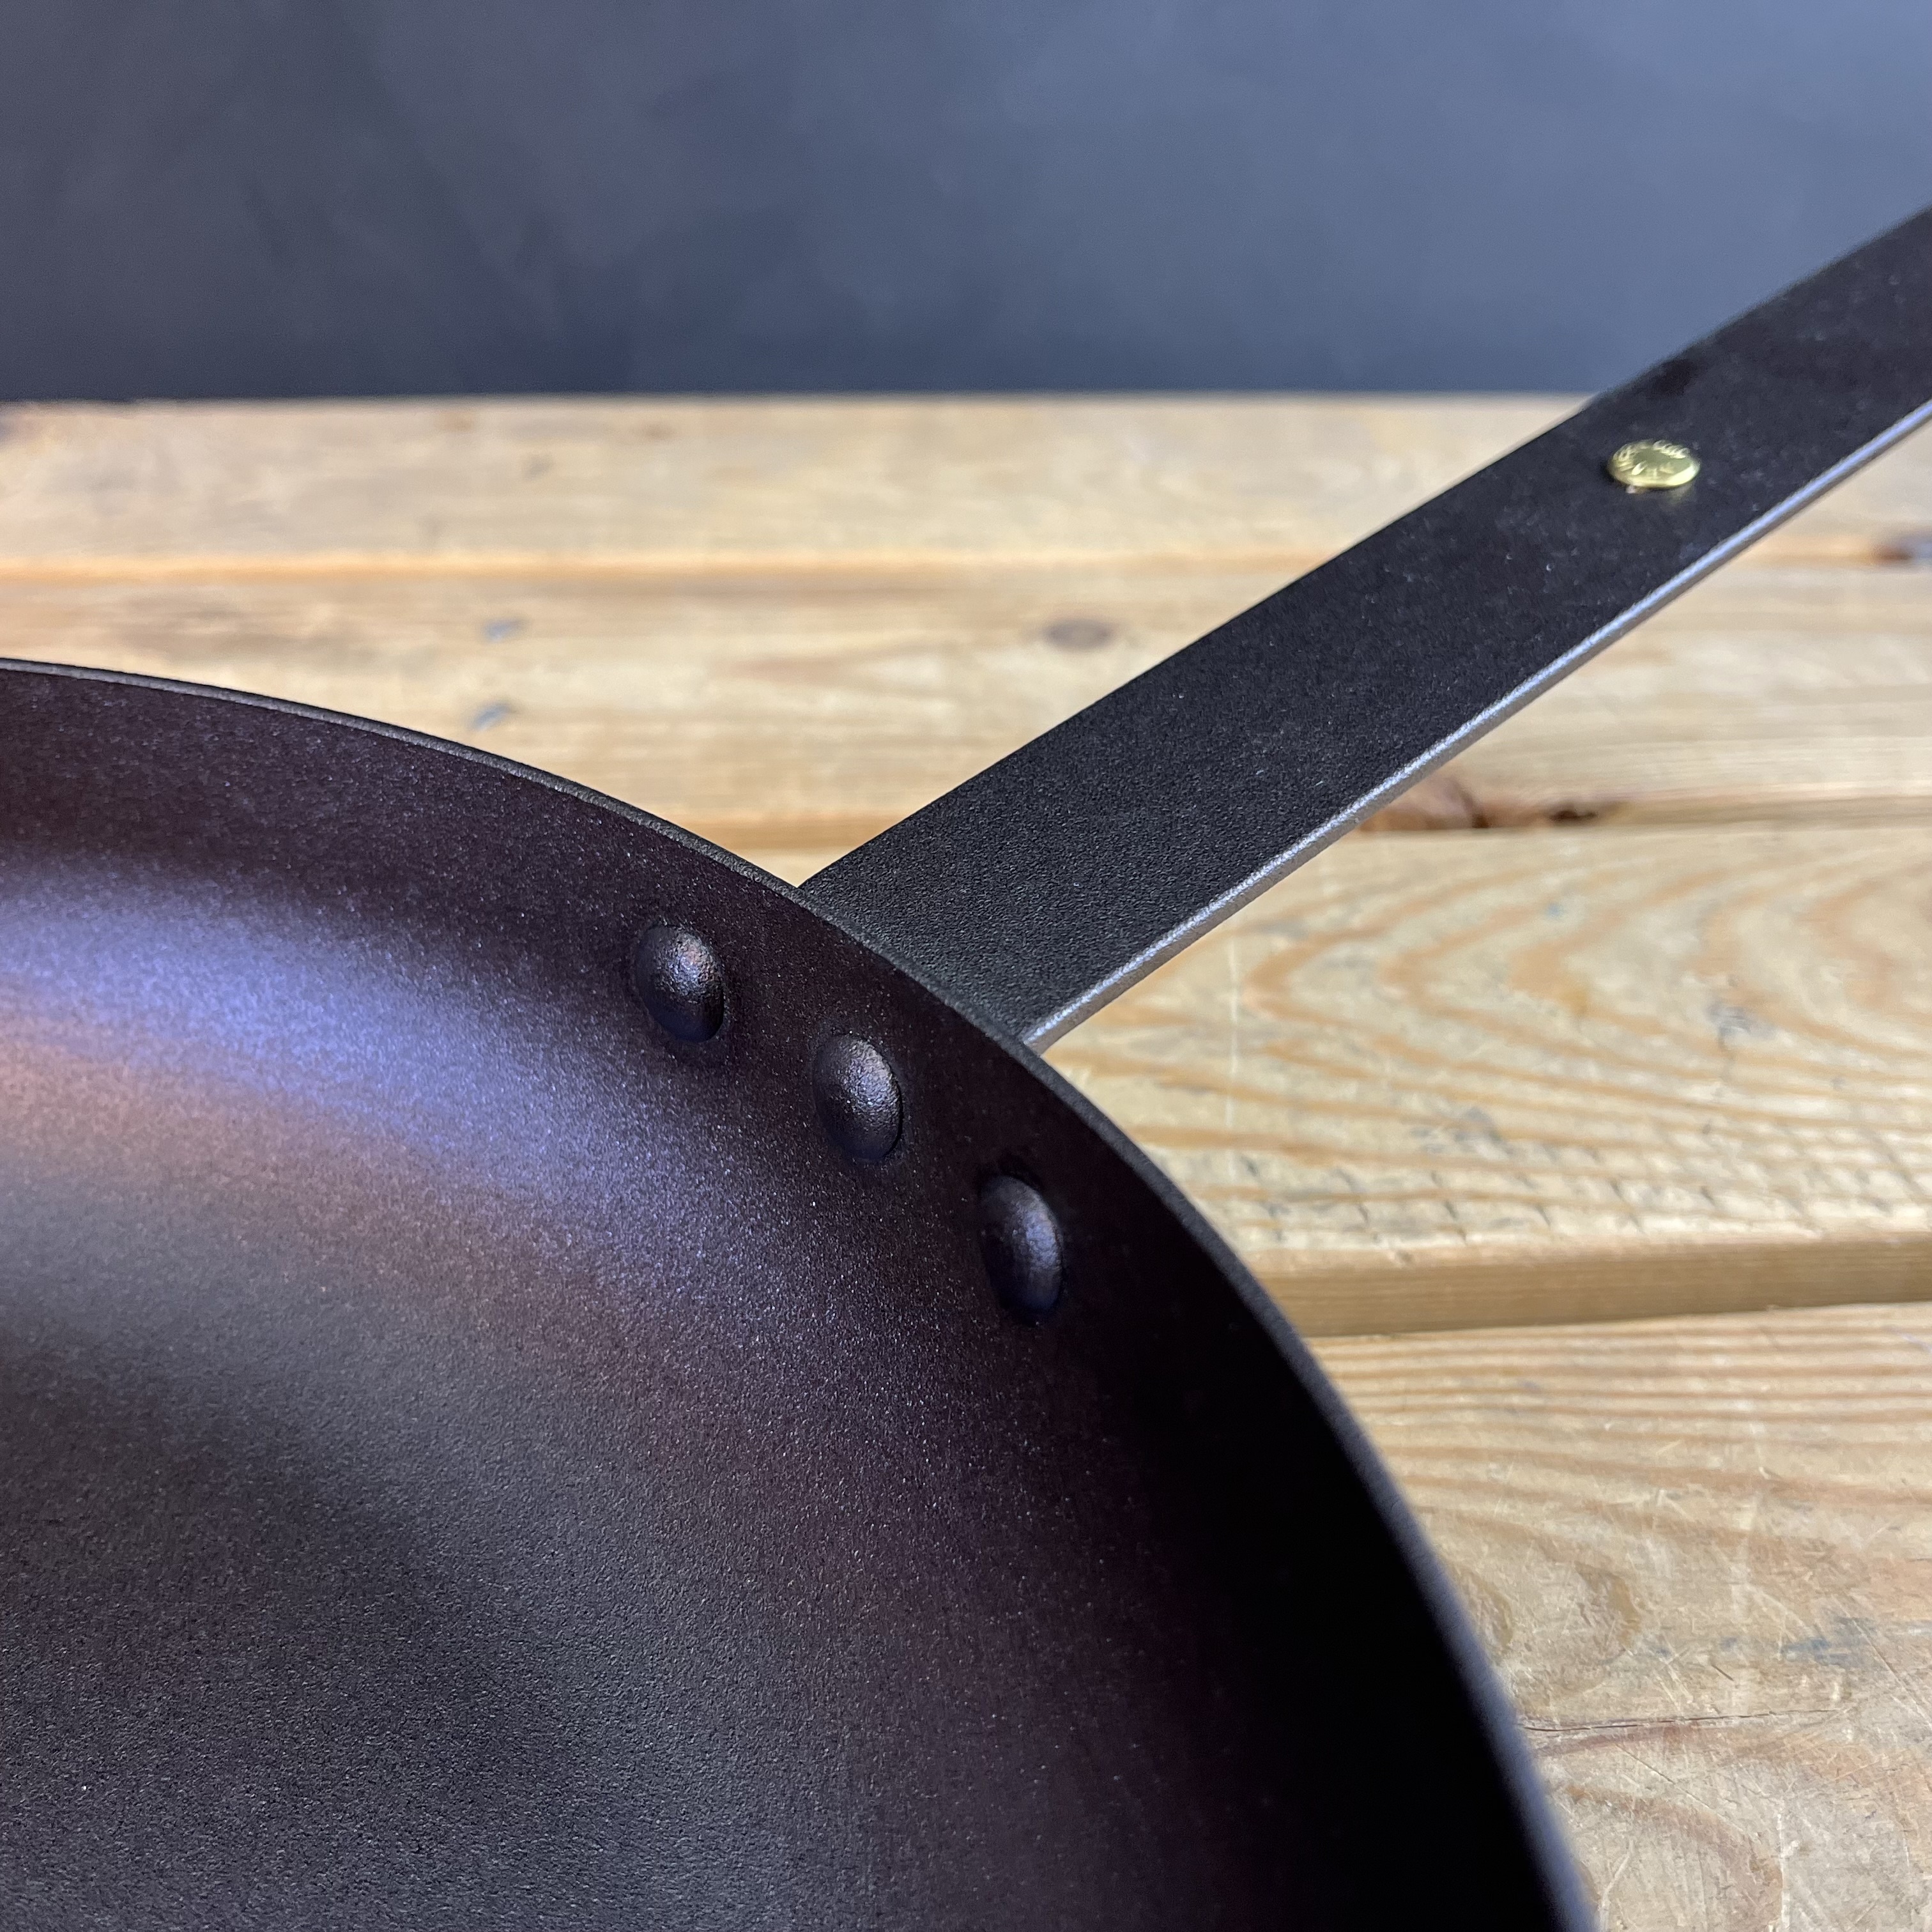 Buy Netherton Foundry Oven Safe Frying Pan - Sous Chef Online Shop 